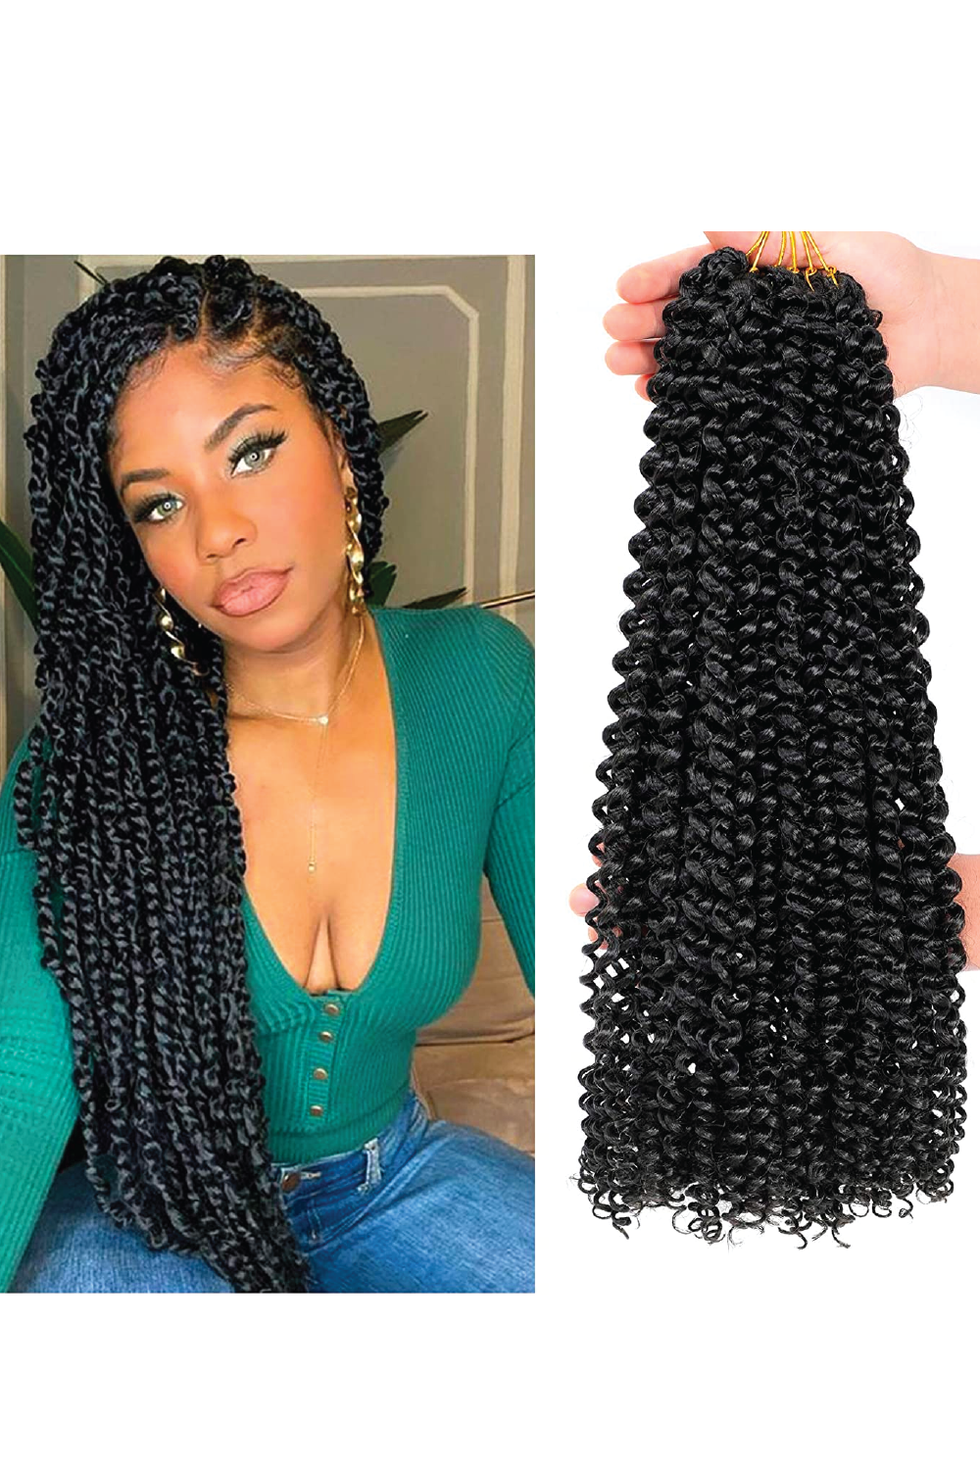 lace front full front malaysian deep curl with edes - Google Search  Hair  styles, Box braids hairstyles, Box braids hairstyles for black women